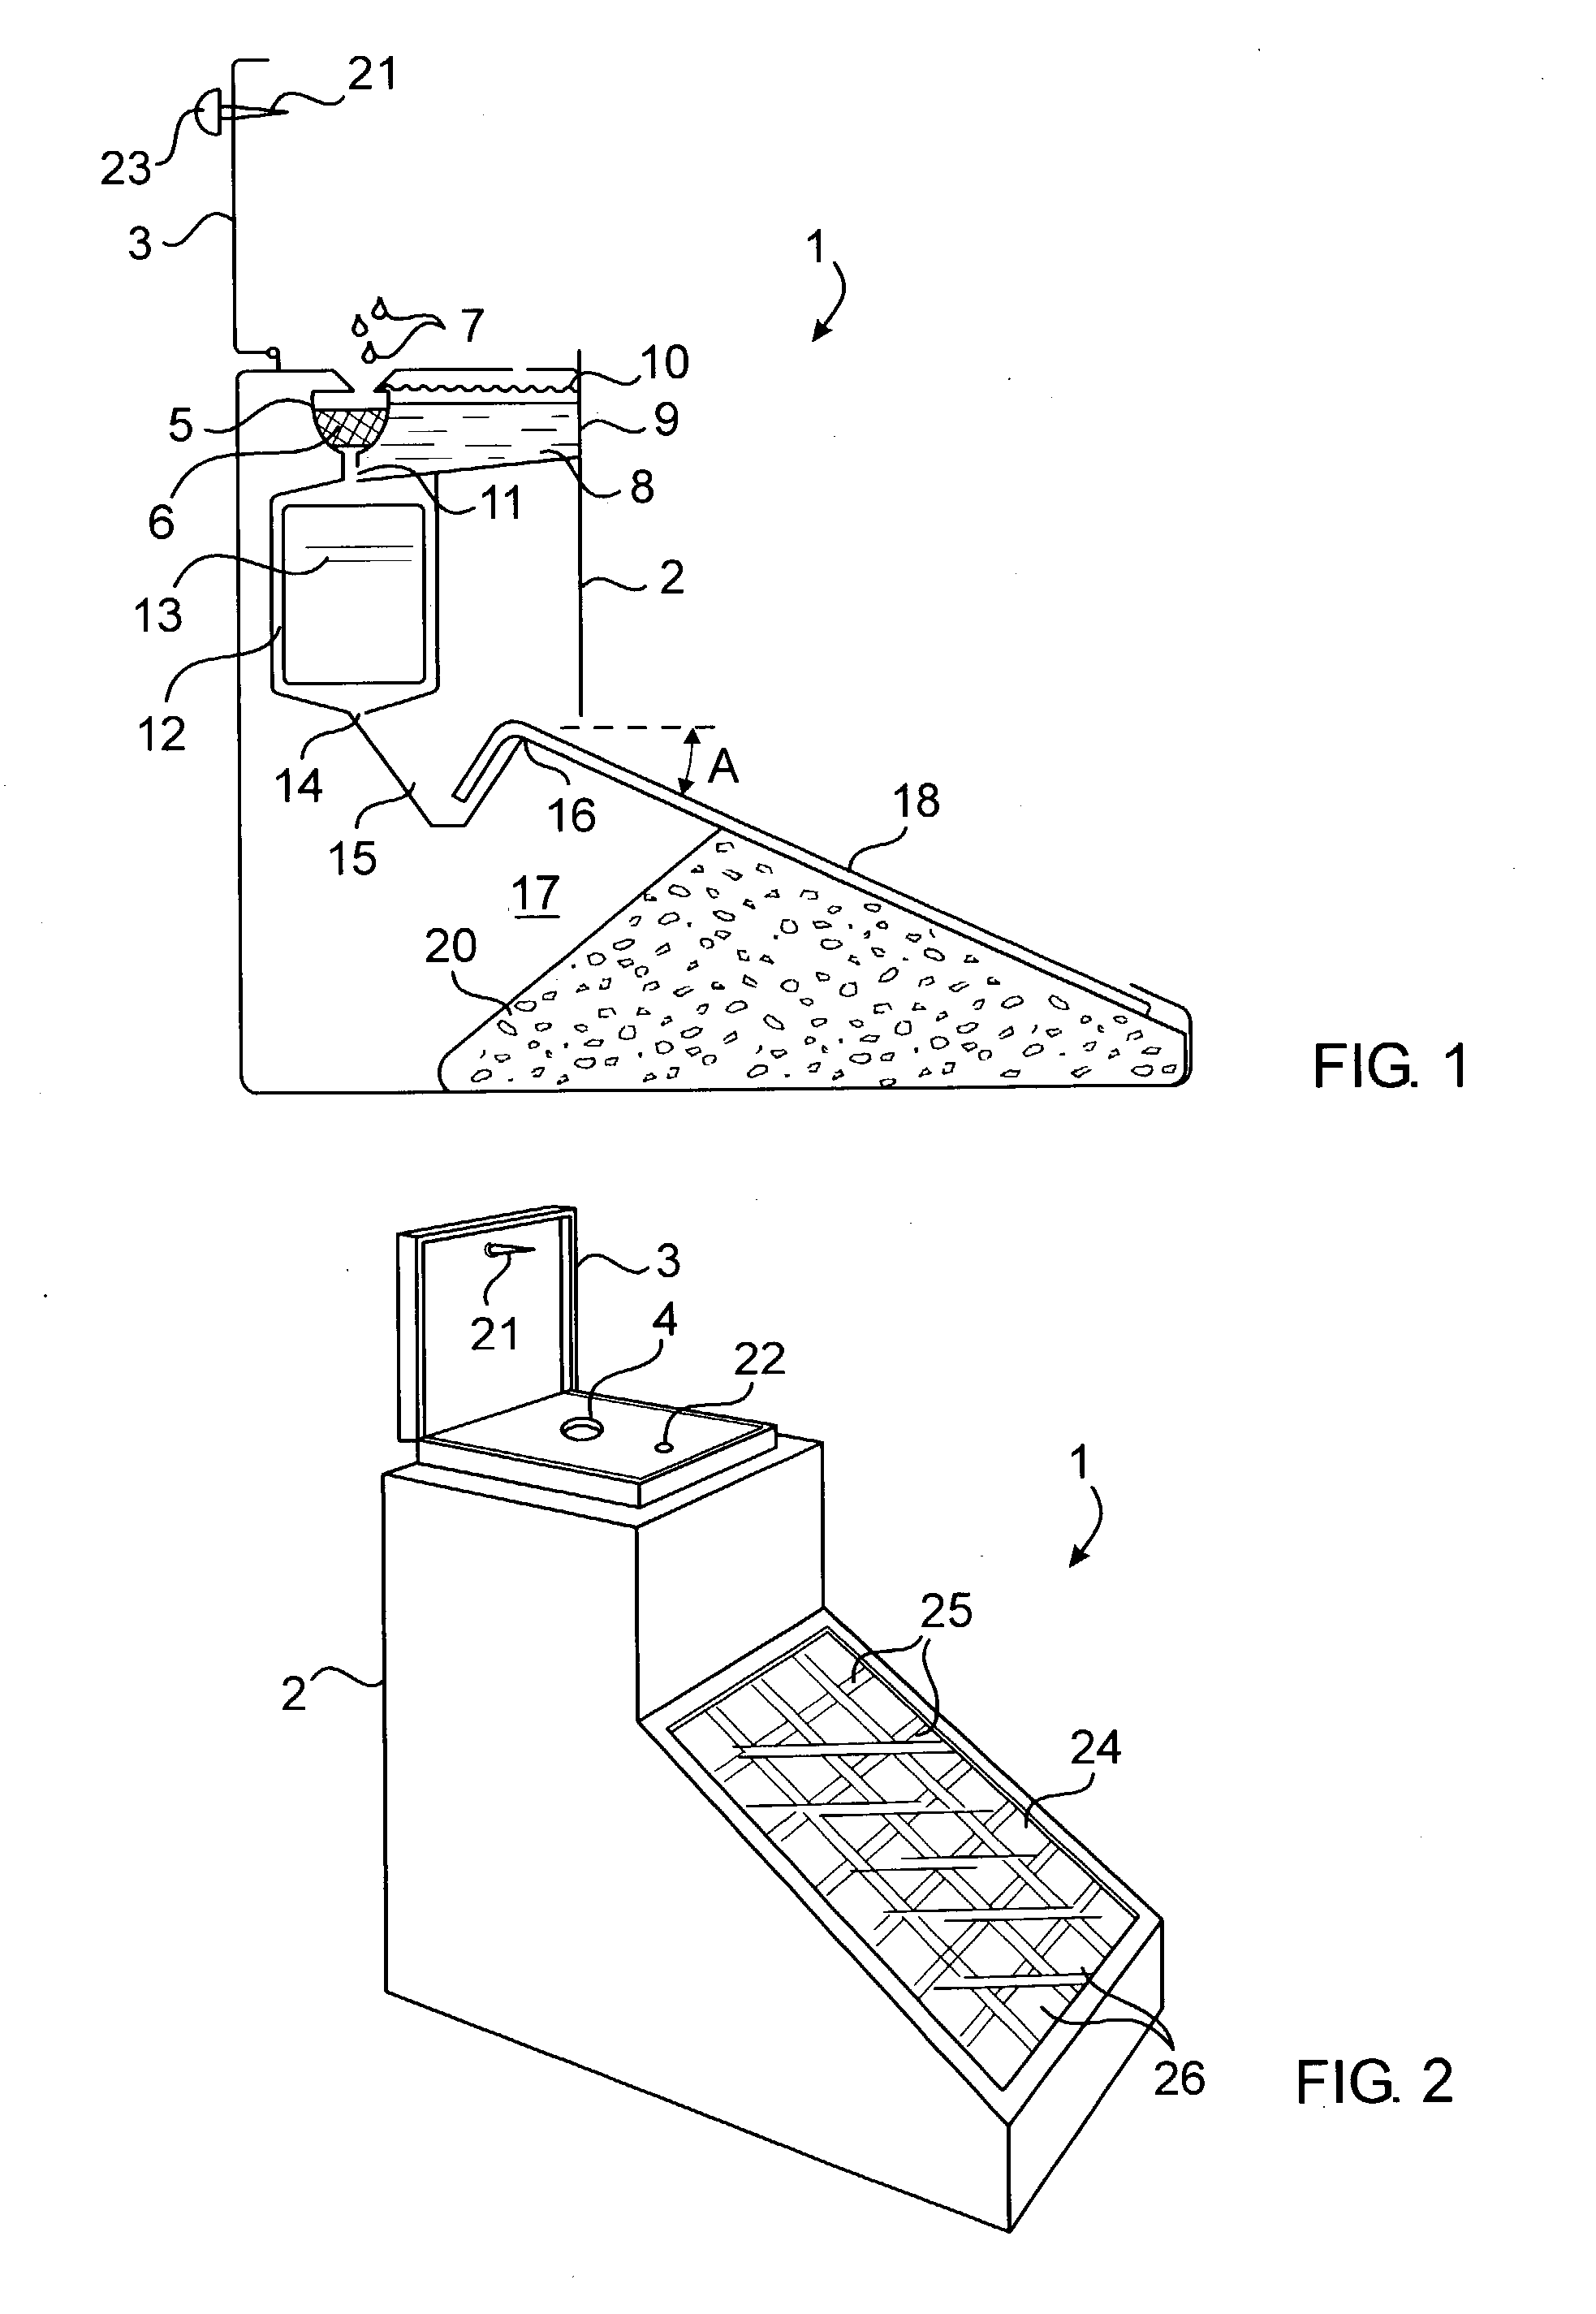 Interrupted, vertical flow testing device